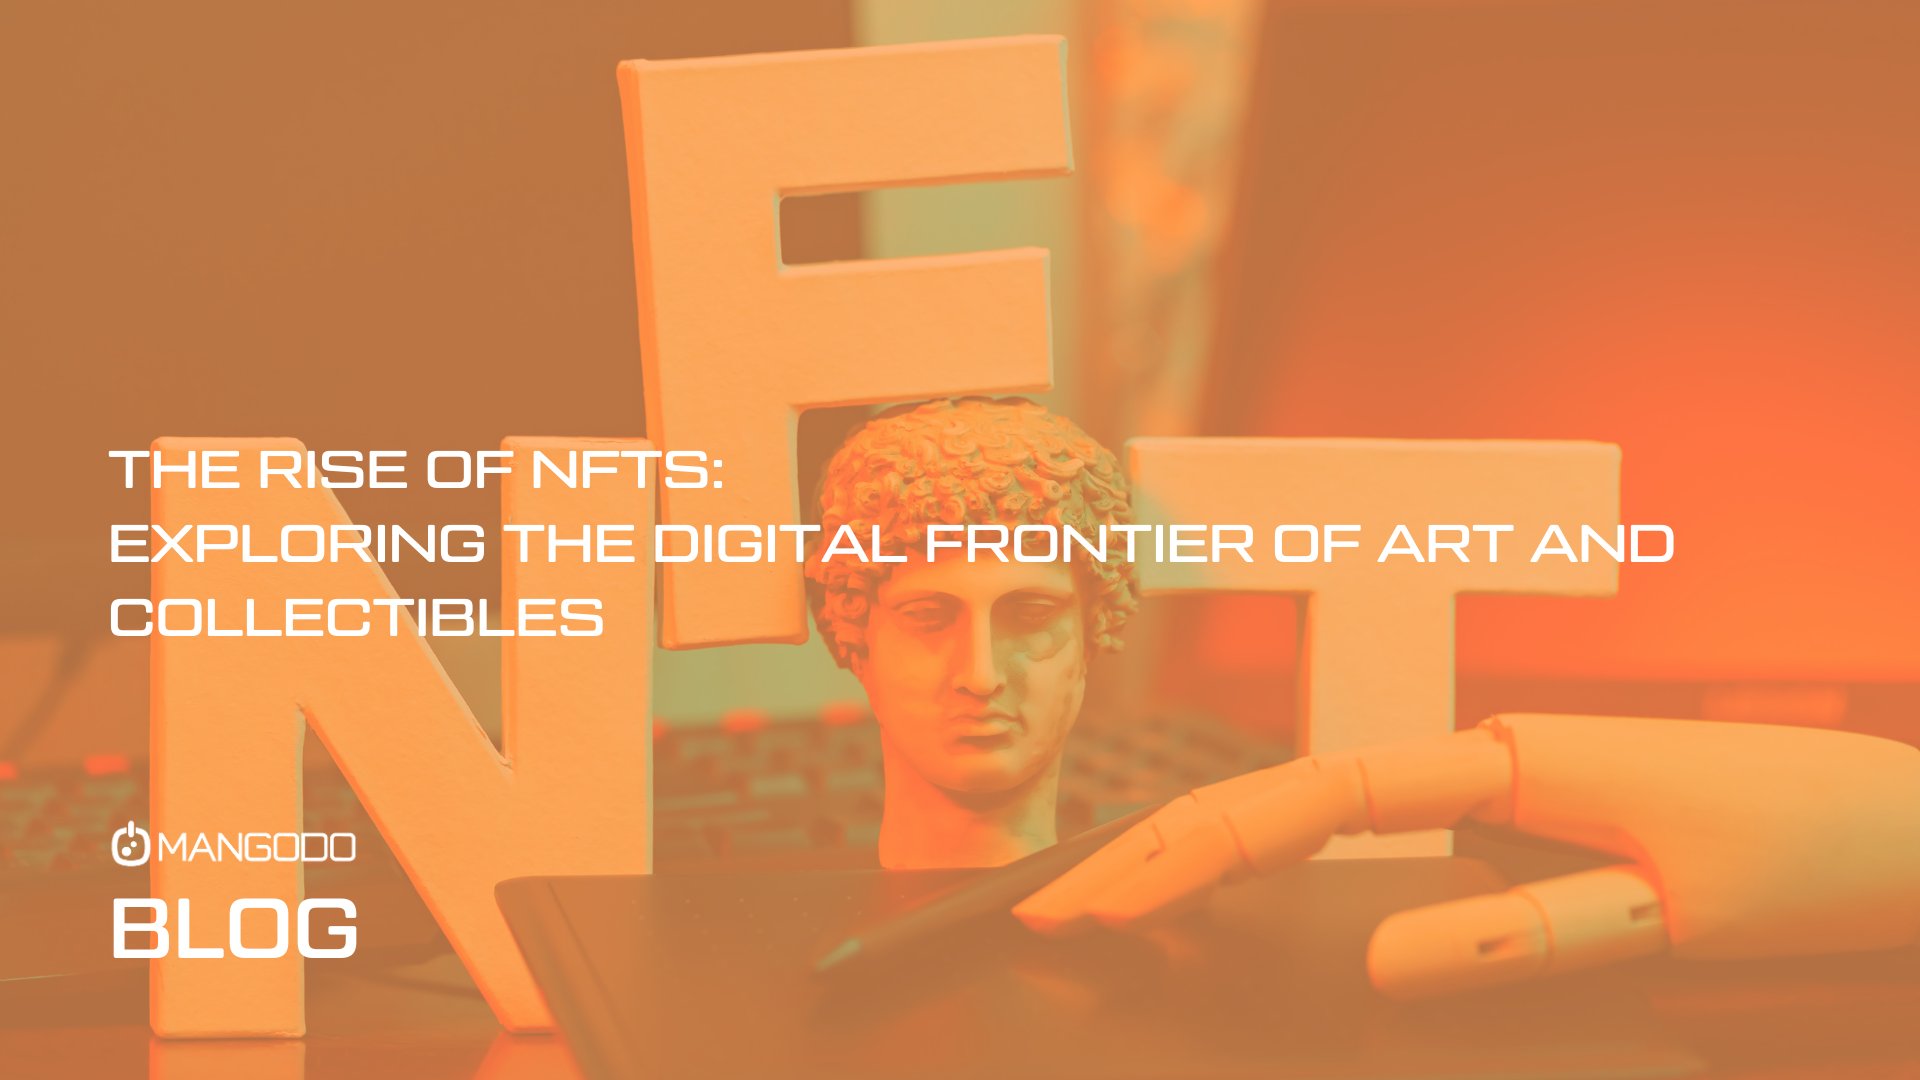 The Rise of NFTs: Exploring the Digital Frontier of Art and Collectibles